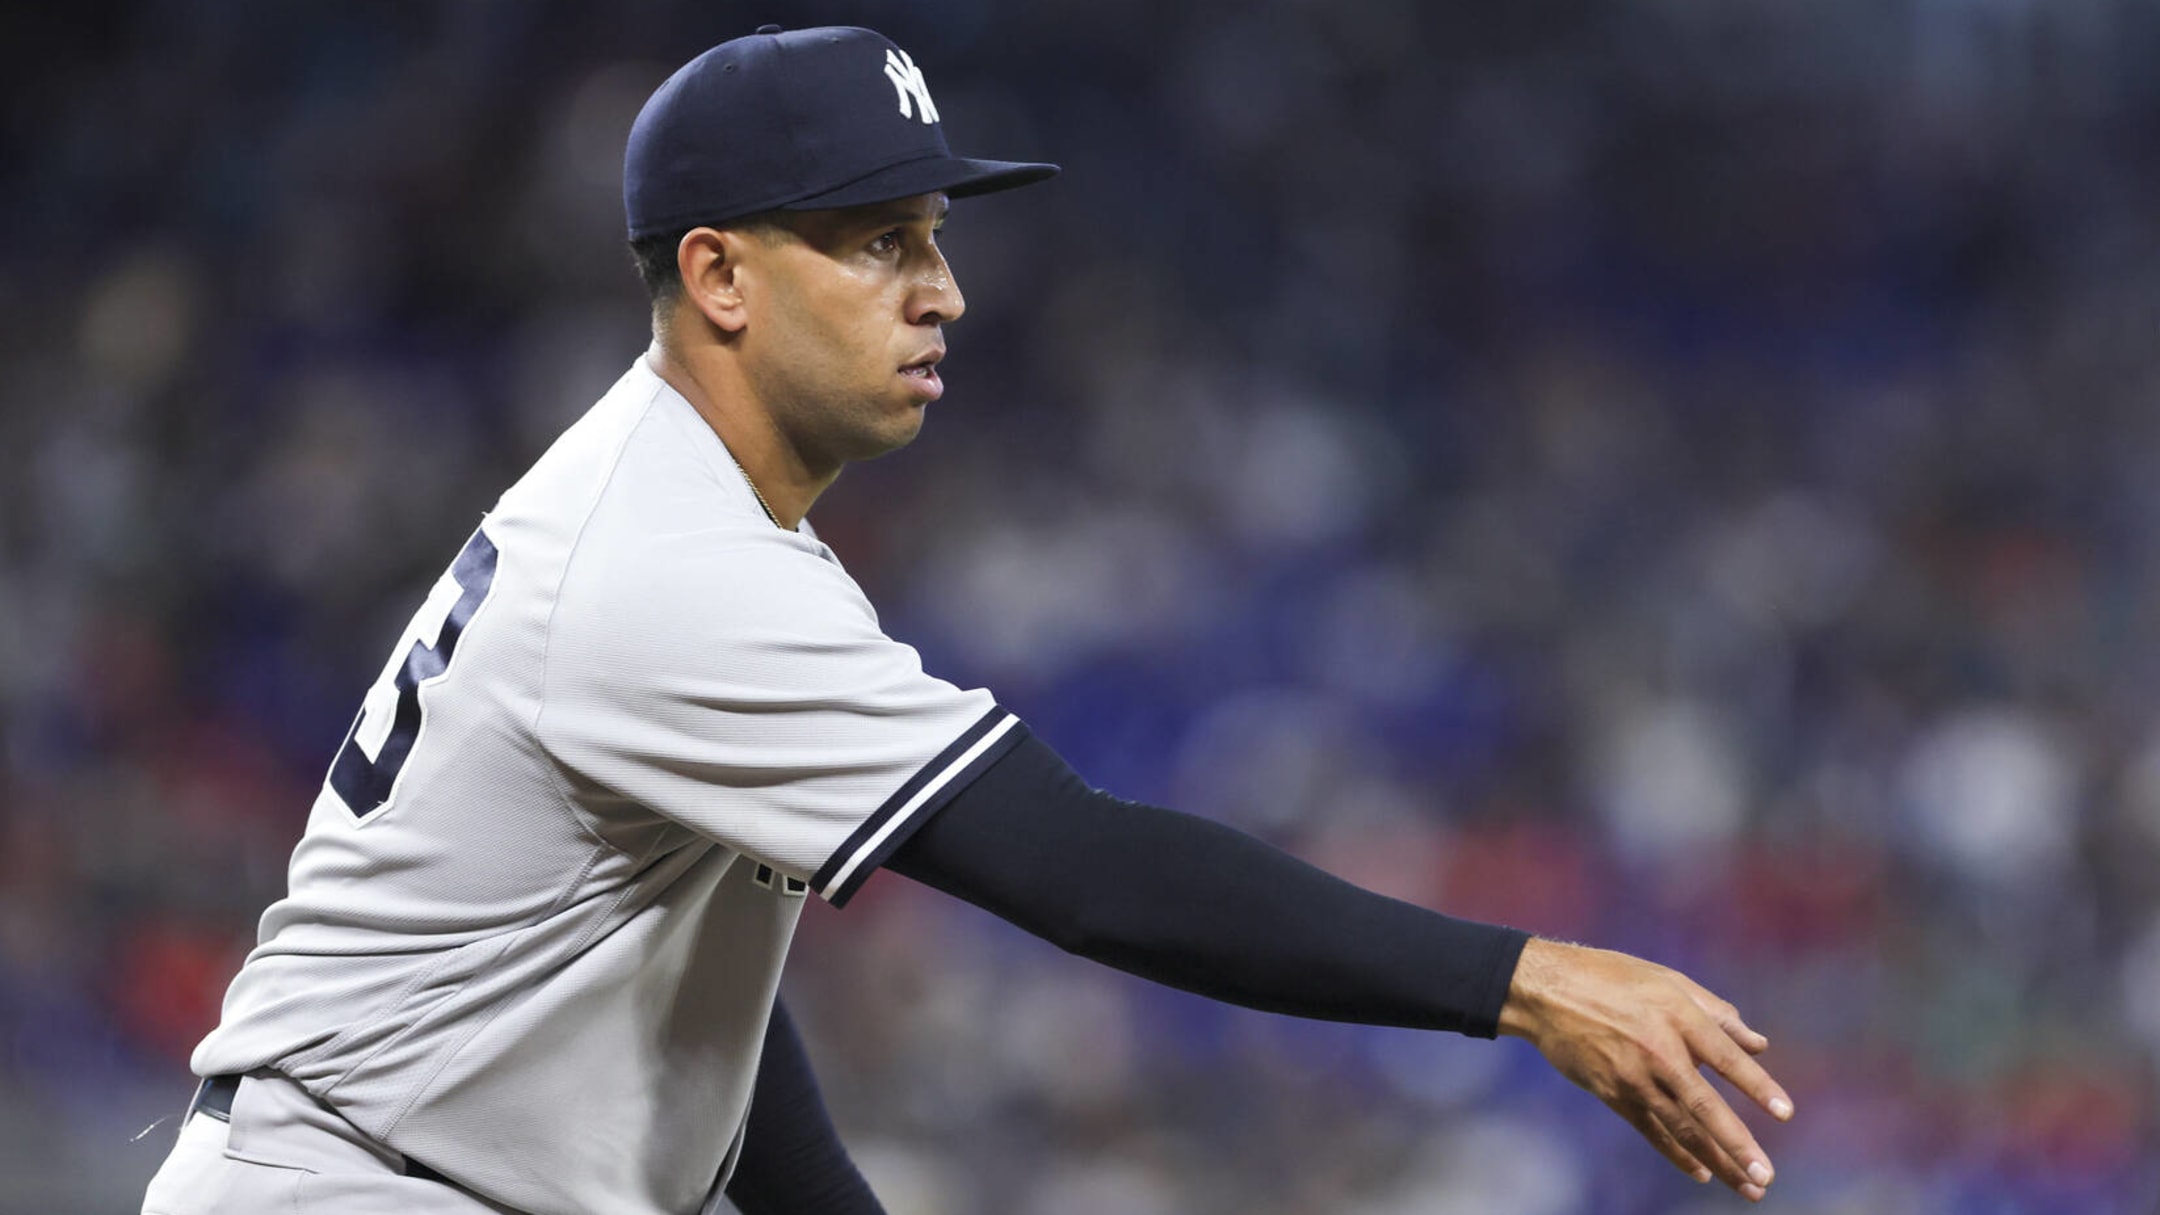 Yankees-Cardinals trade details: New York acquires outfielder